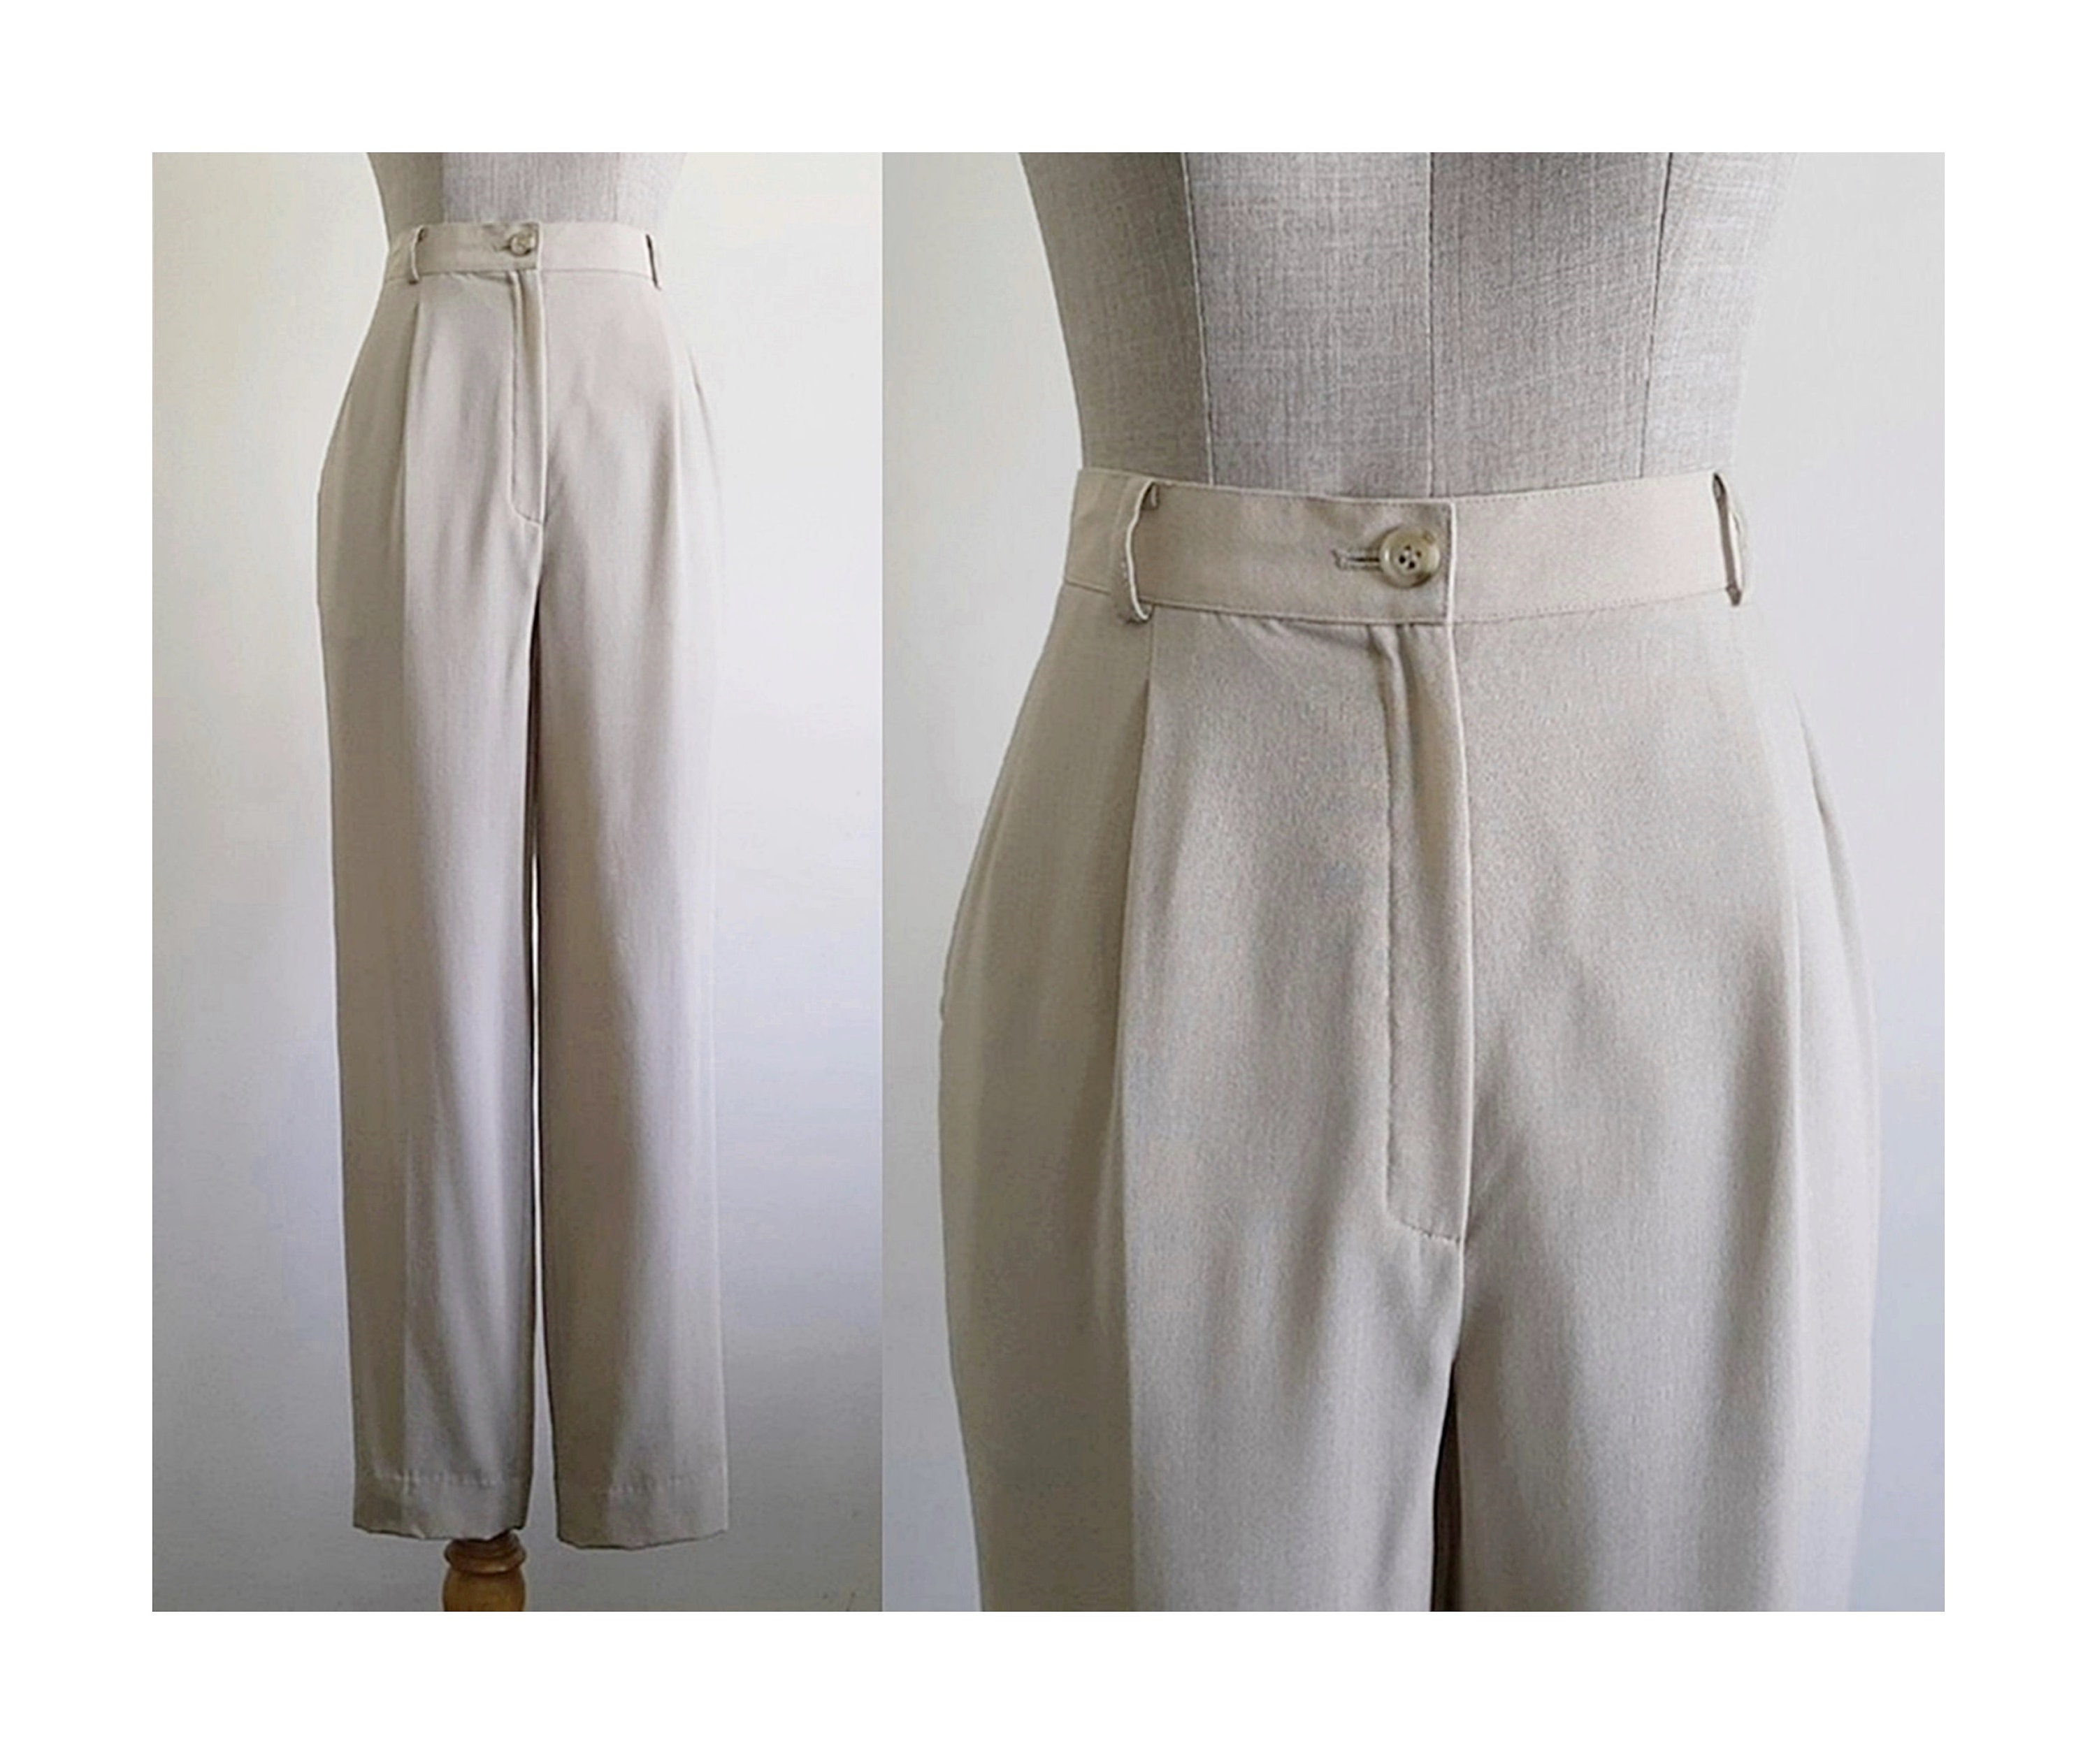 Buy Vintage High Waisted Pants Online In India -  India